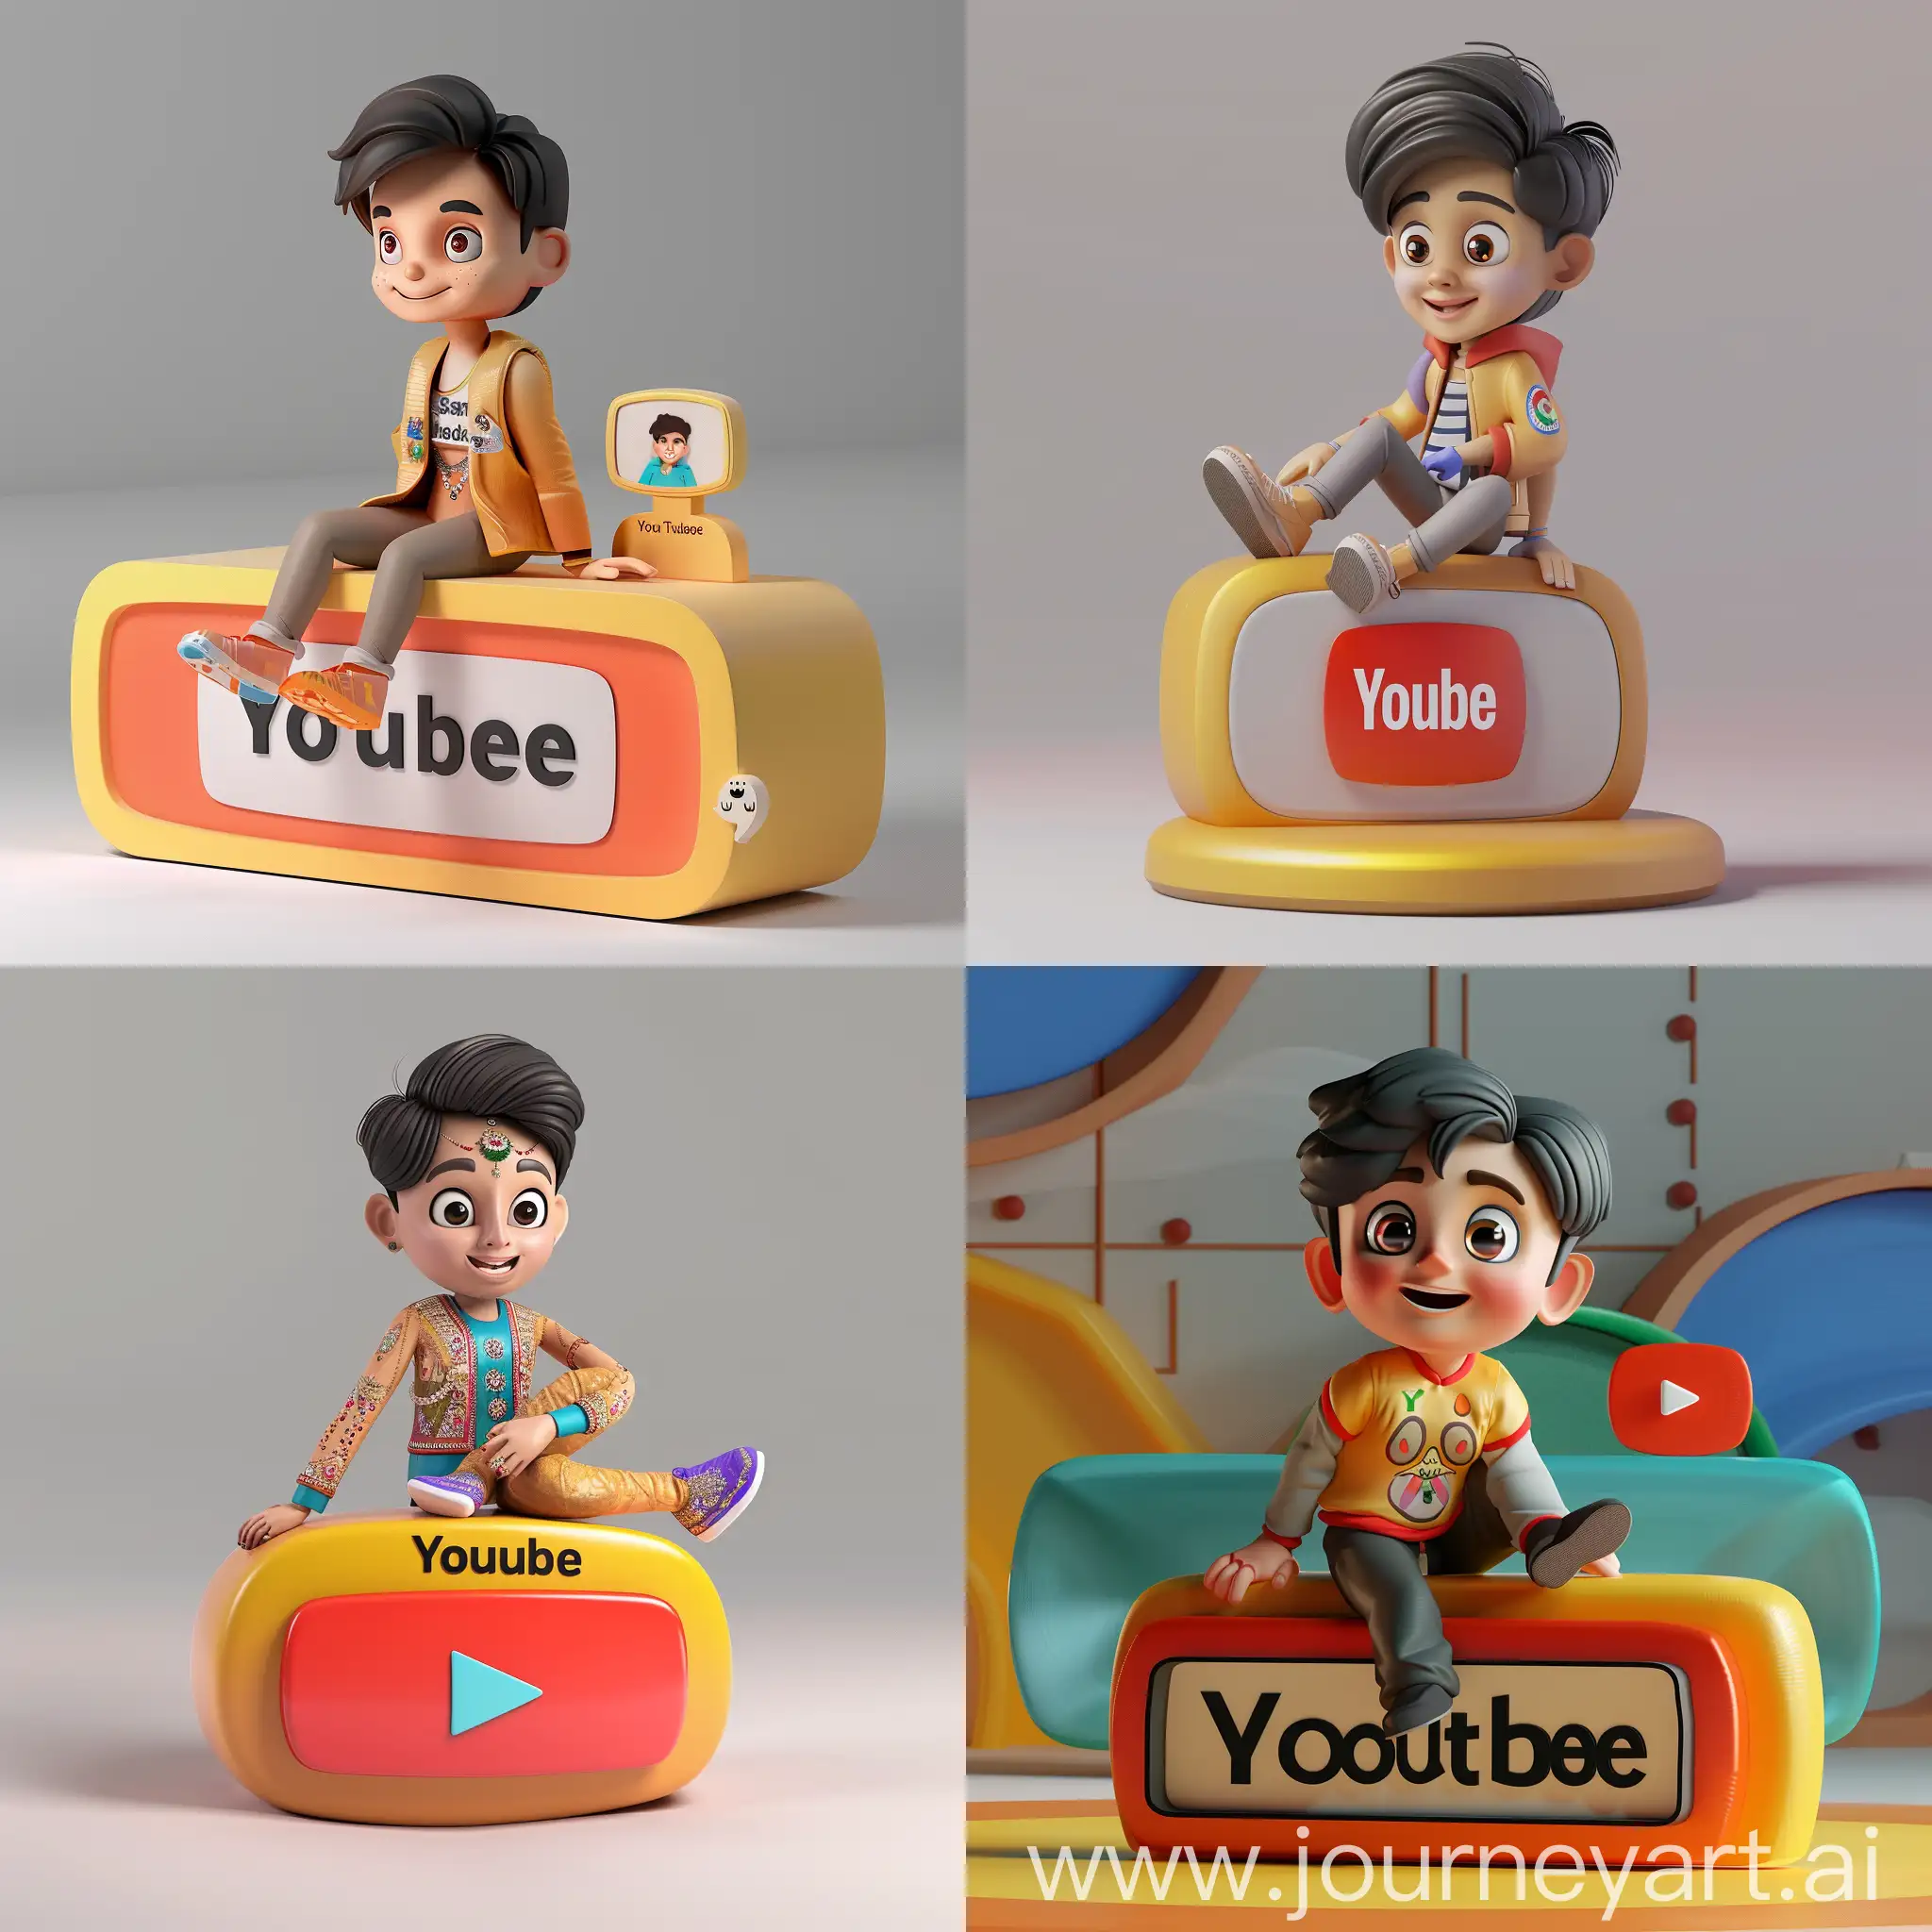 Prompt: "Create a 3D illustration of an animated character of a handsom boy sitting casually on top of a social media logo "YouTube". The character must wear modern Indian clothes. The background of the character is mockup of his YouTube profile page with a profile name "Smart Graphics" and a profile picture same as character."